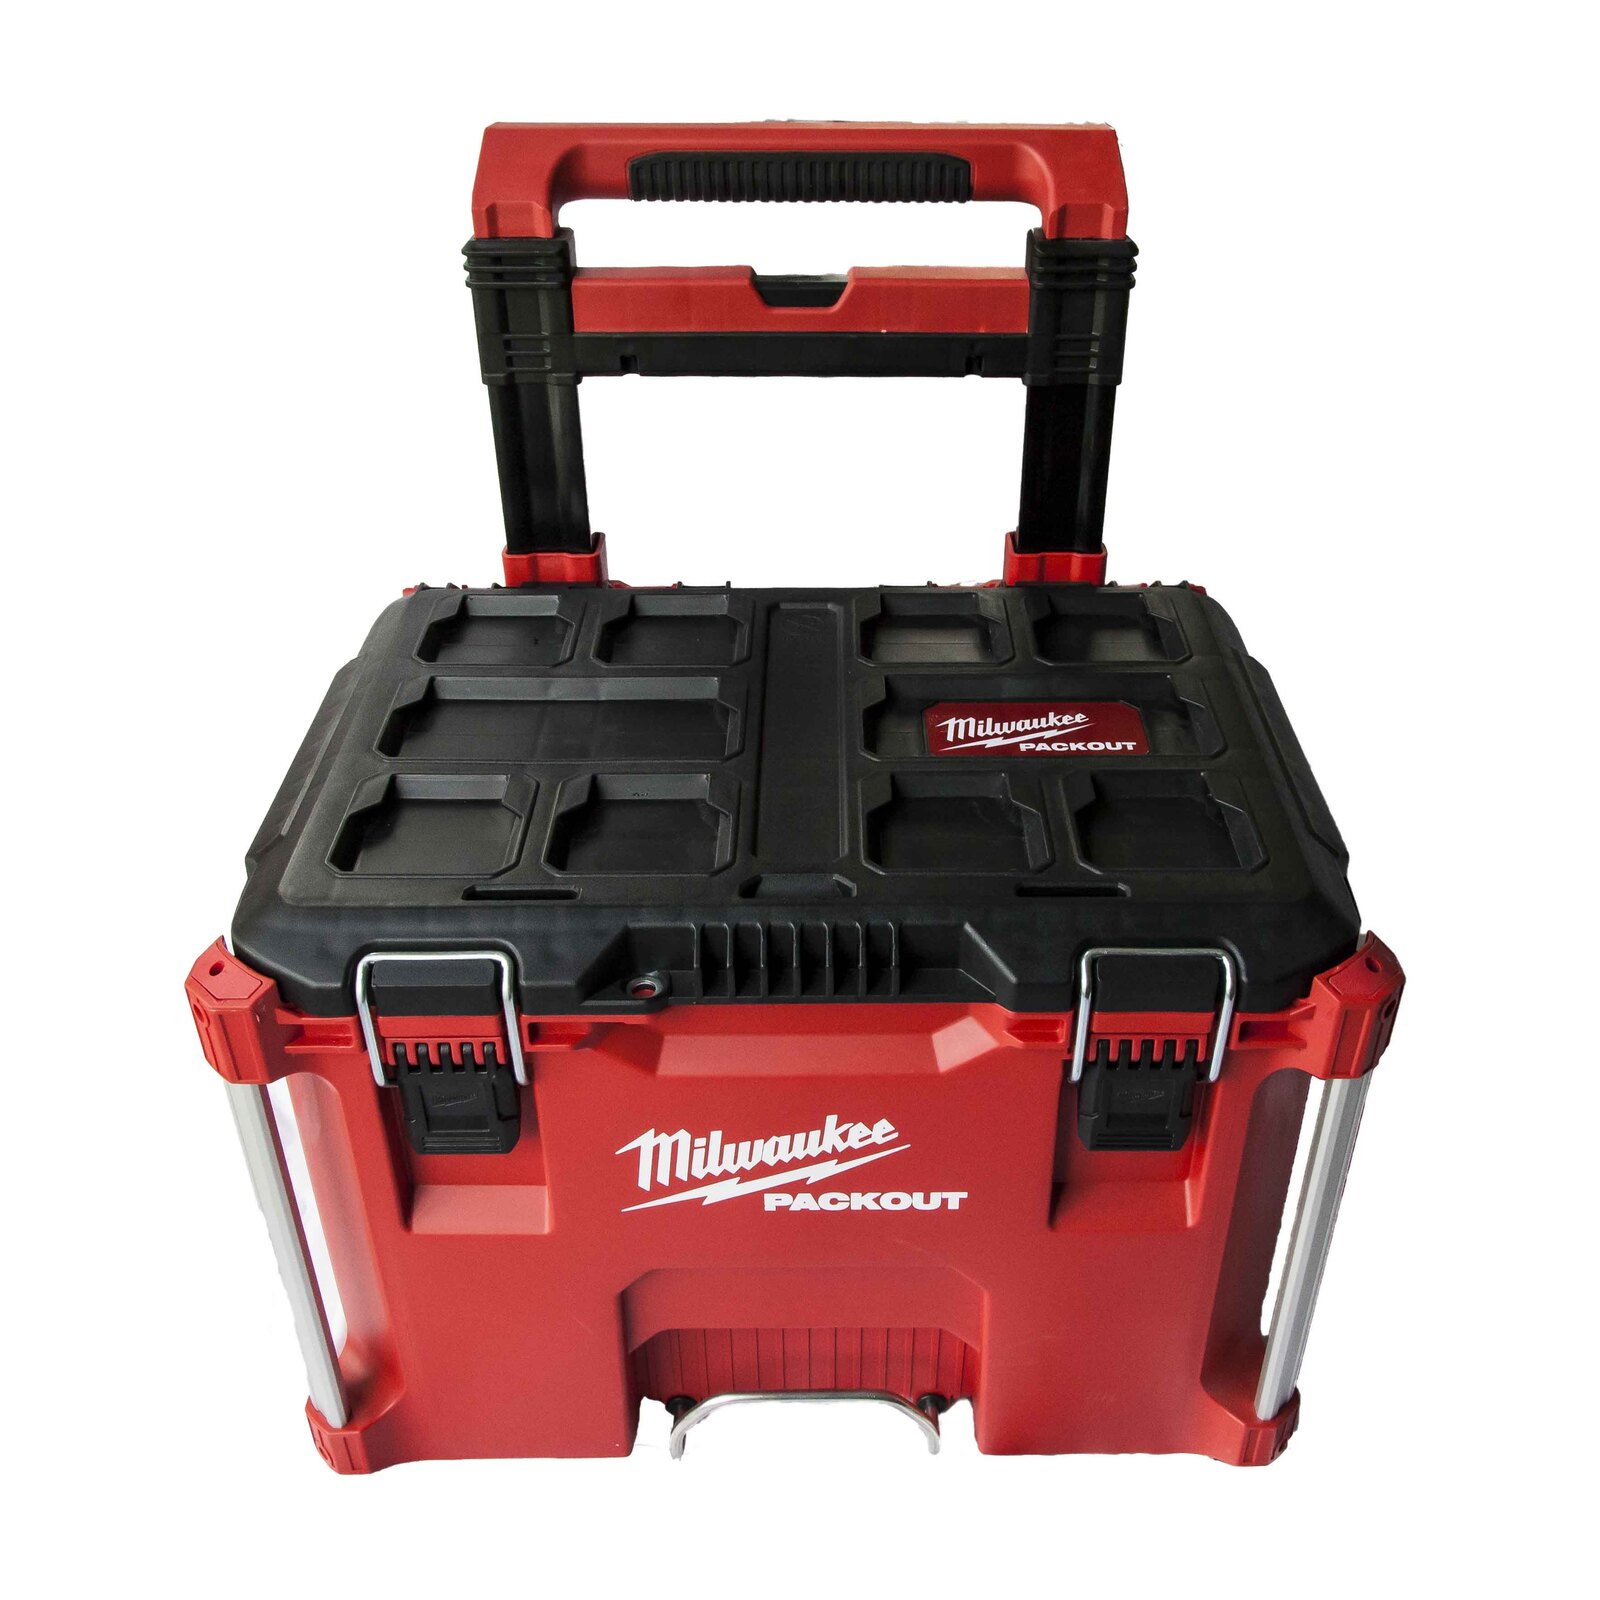 MILWAUKEE PACKOUT ROLLING TOOL BOX 48228426